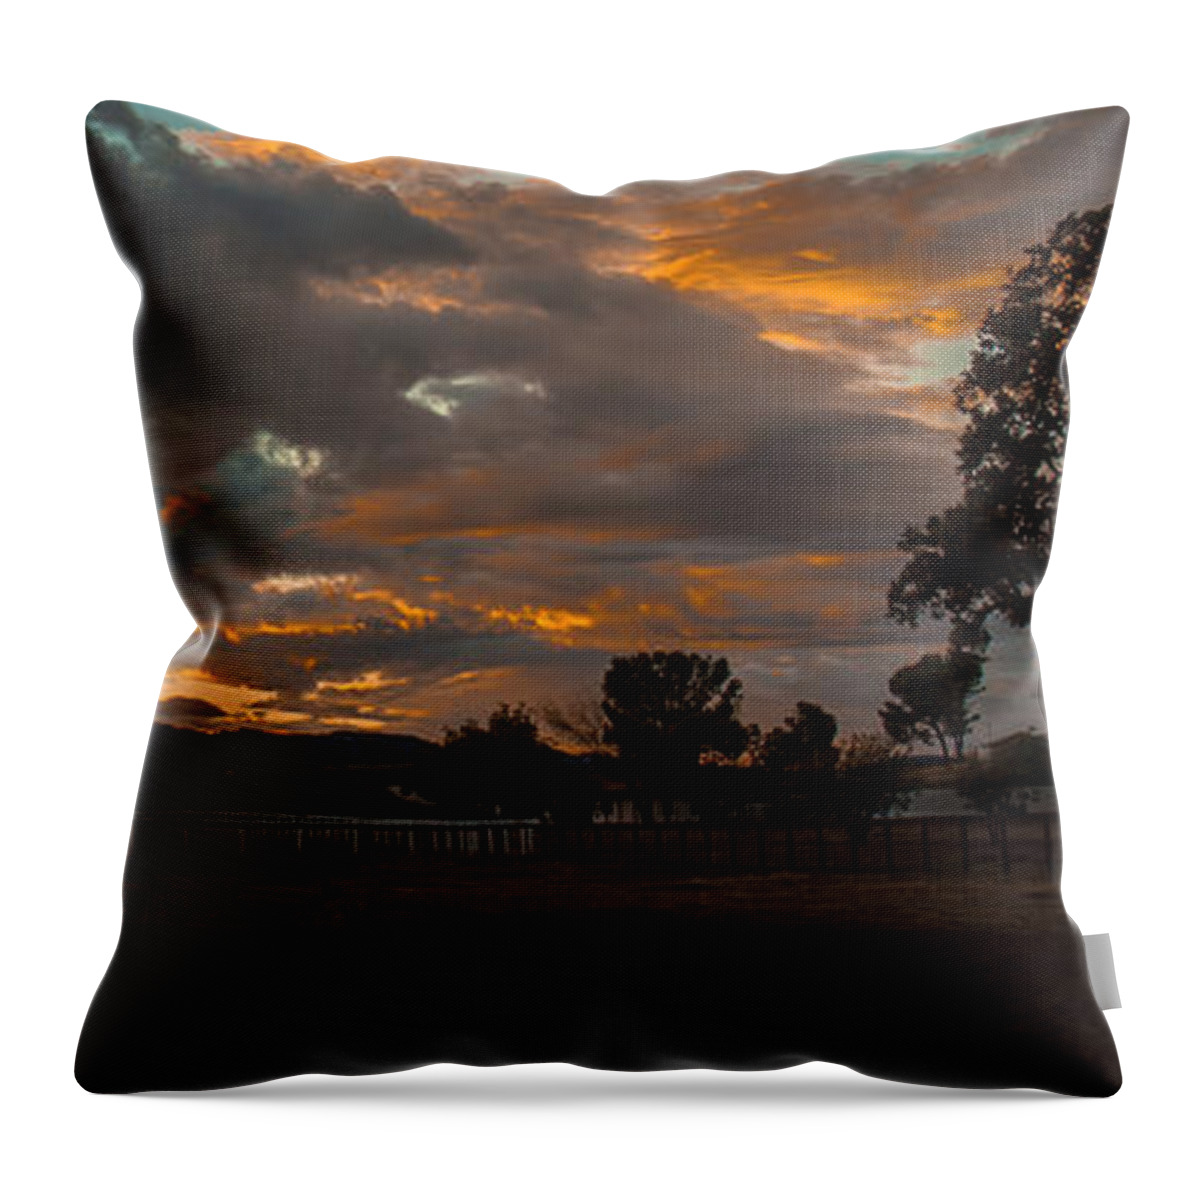  Throw Pillow featuring the photograph Autumn Sky by Tim Bryan